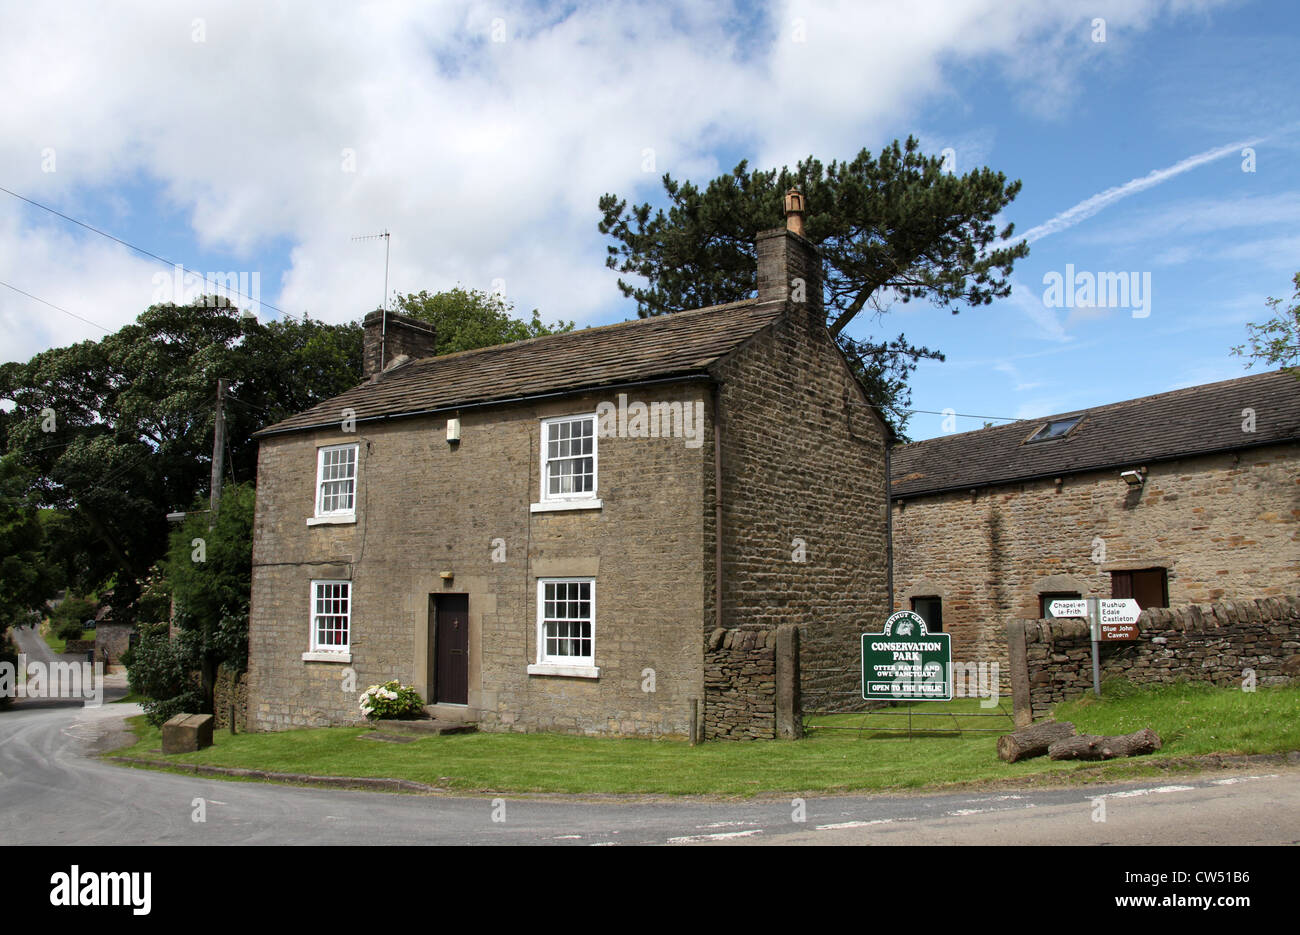 Entrance to the Chestnut Centre at Chapel-en-le-Frith in the Peak District Stock Photo